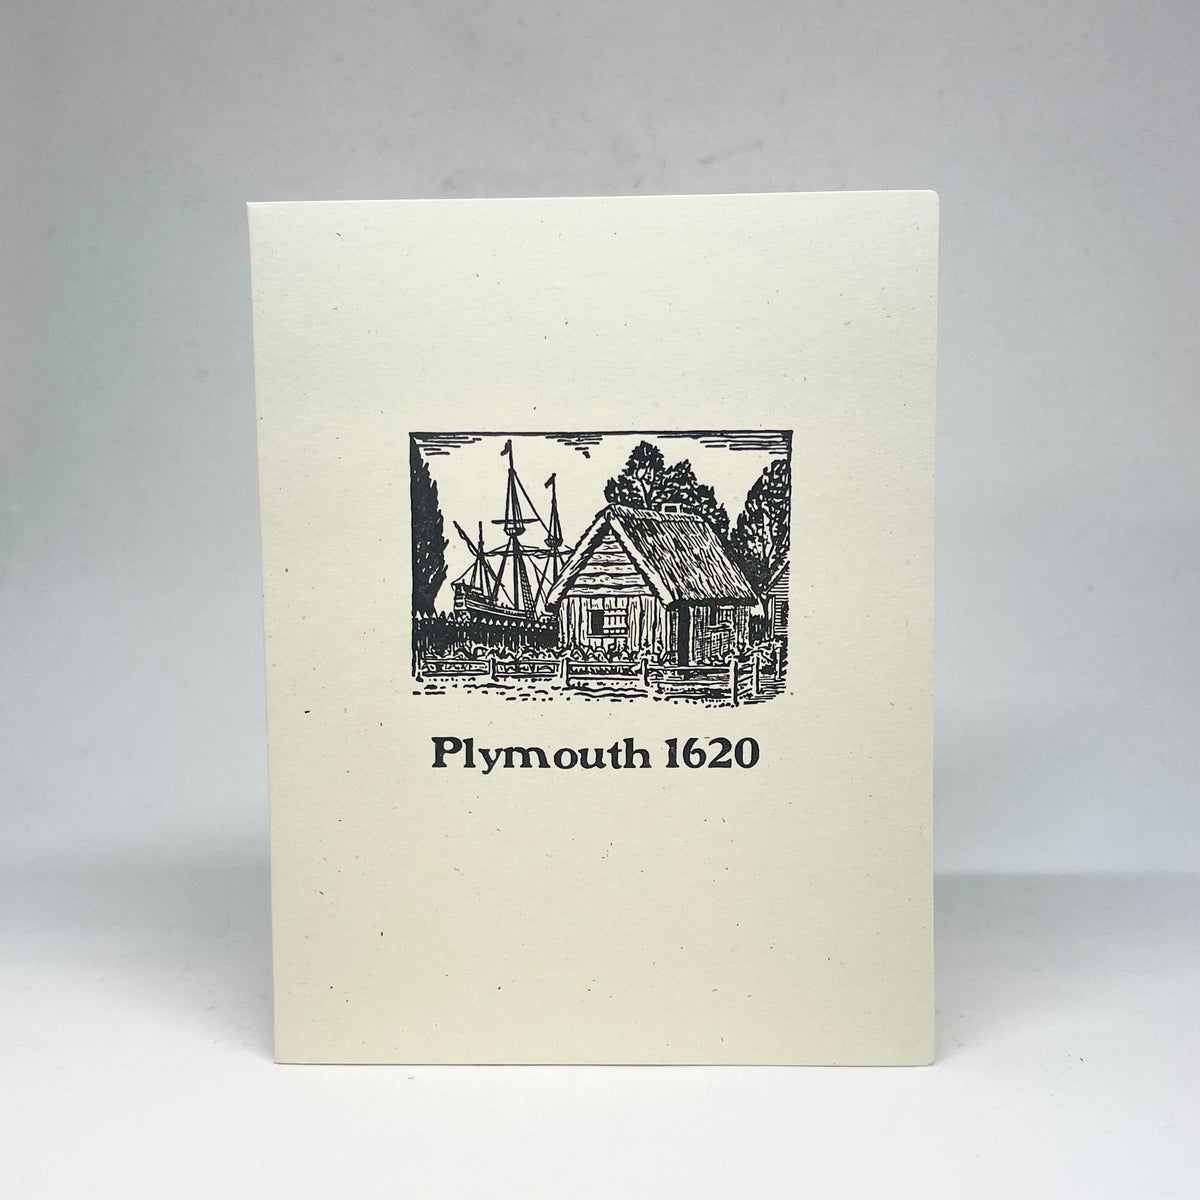 Plymouth 1620